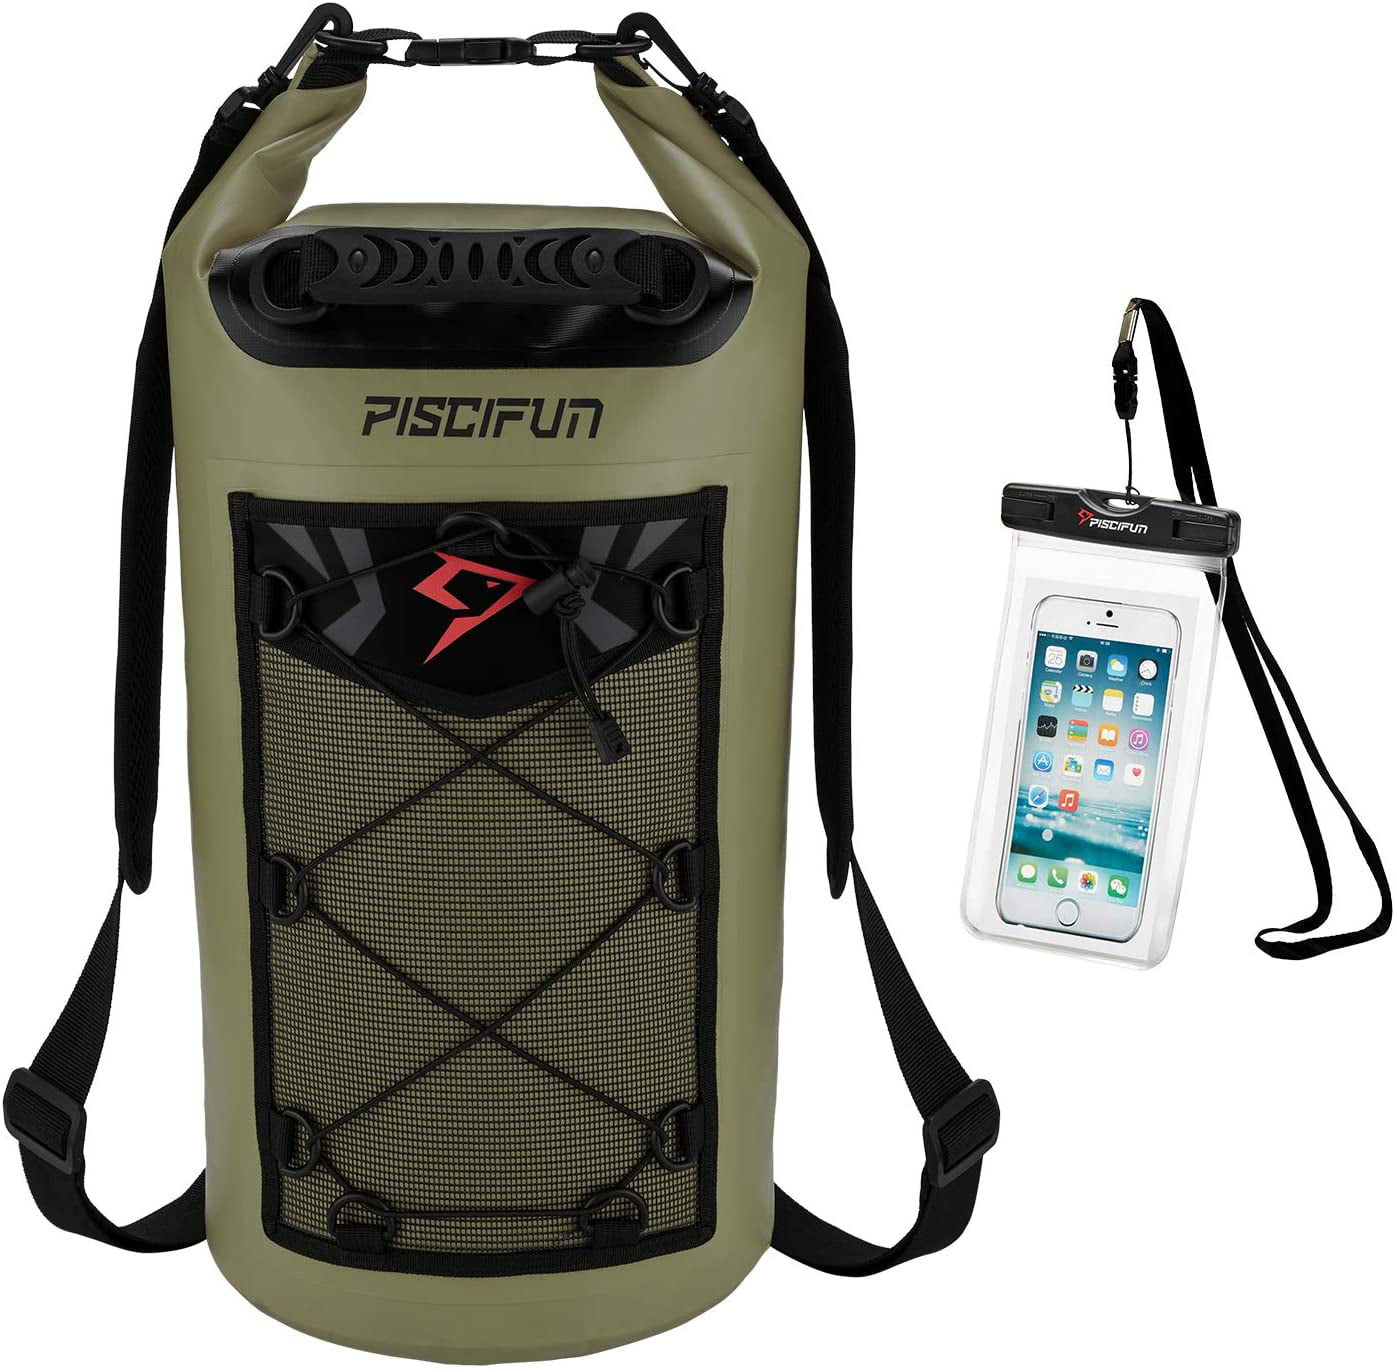 With Waterproof Cellphone case. Waterproof Dry Bag 3 Pack 5L/10L/20L 